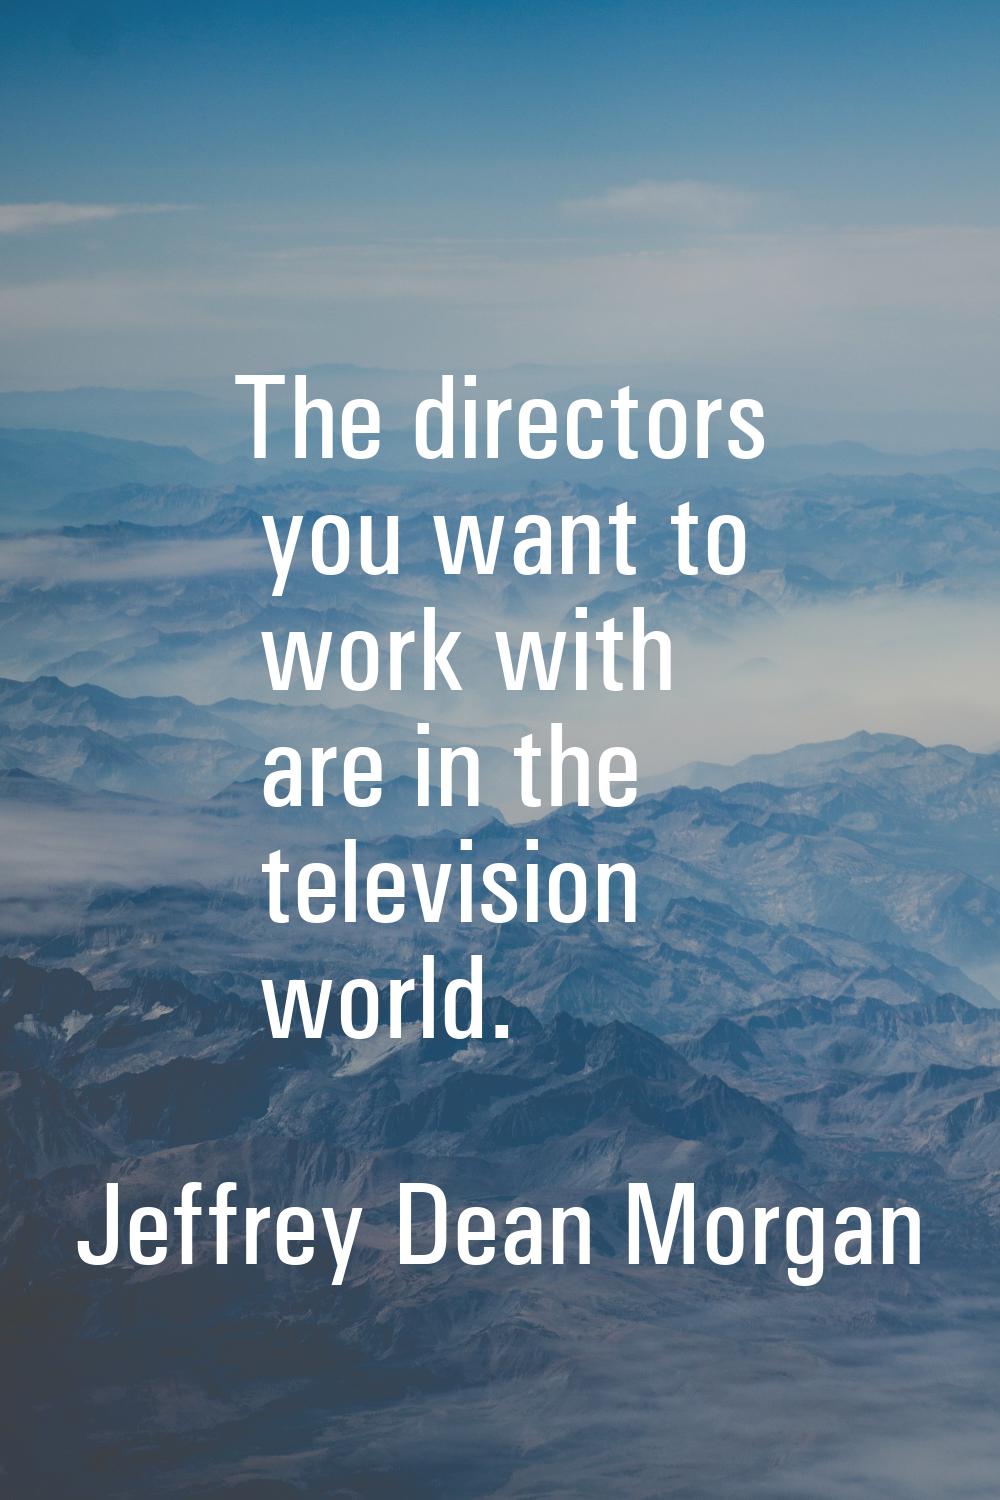 The directors you want to work with are in the television world.